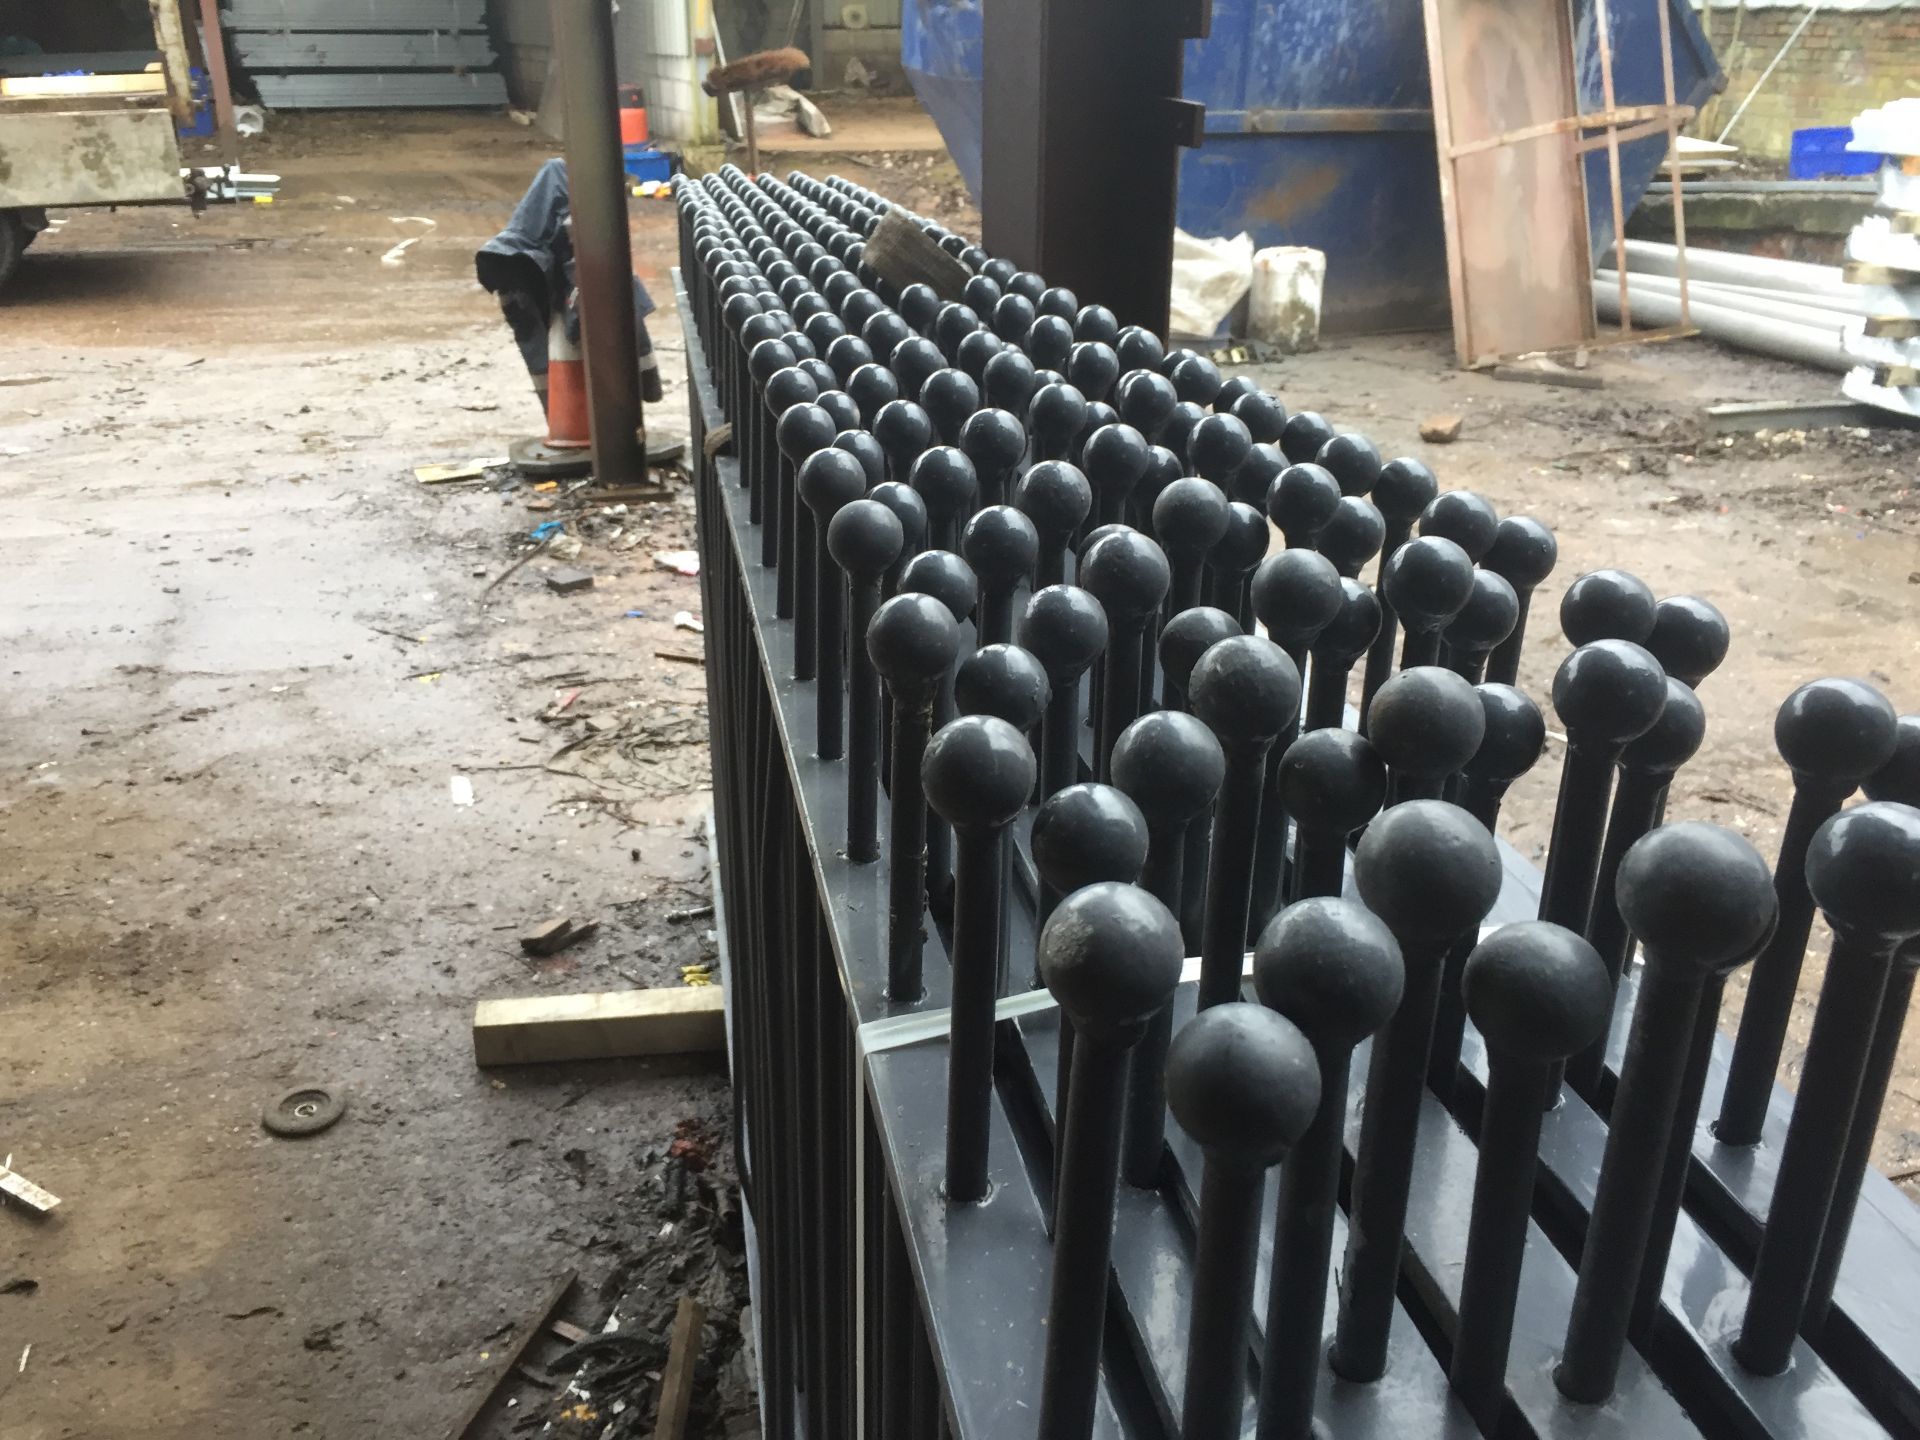 45m x 1200mm high Ball Top Fence Panels (New) - Image 2 of 2